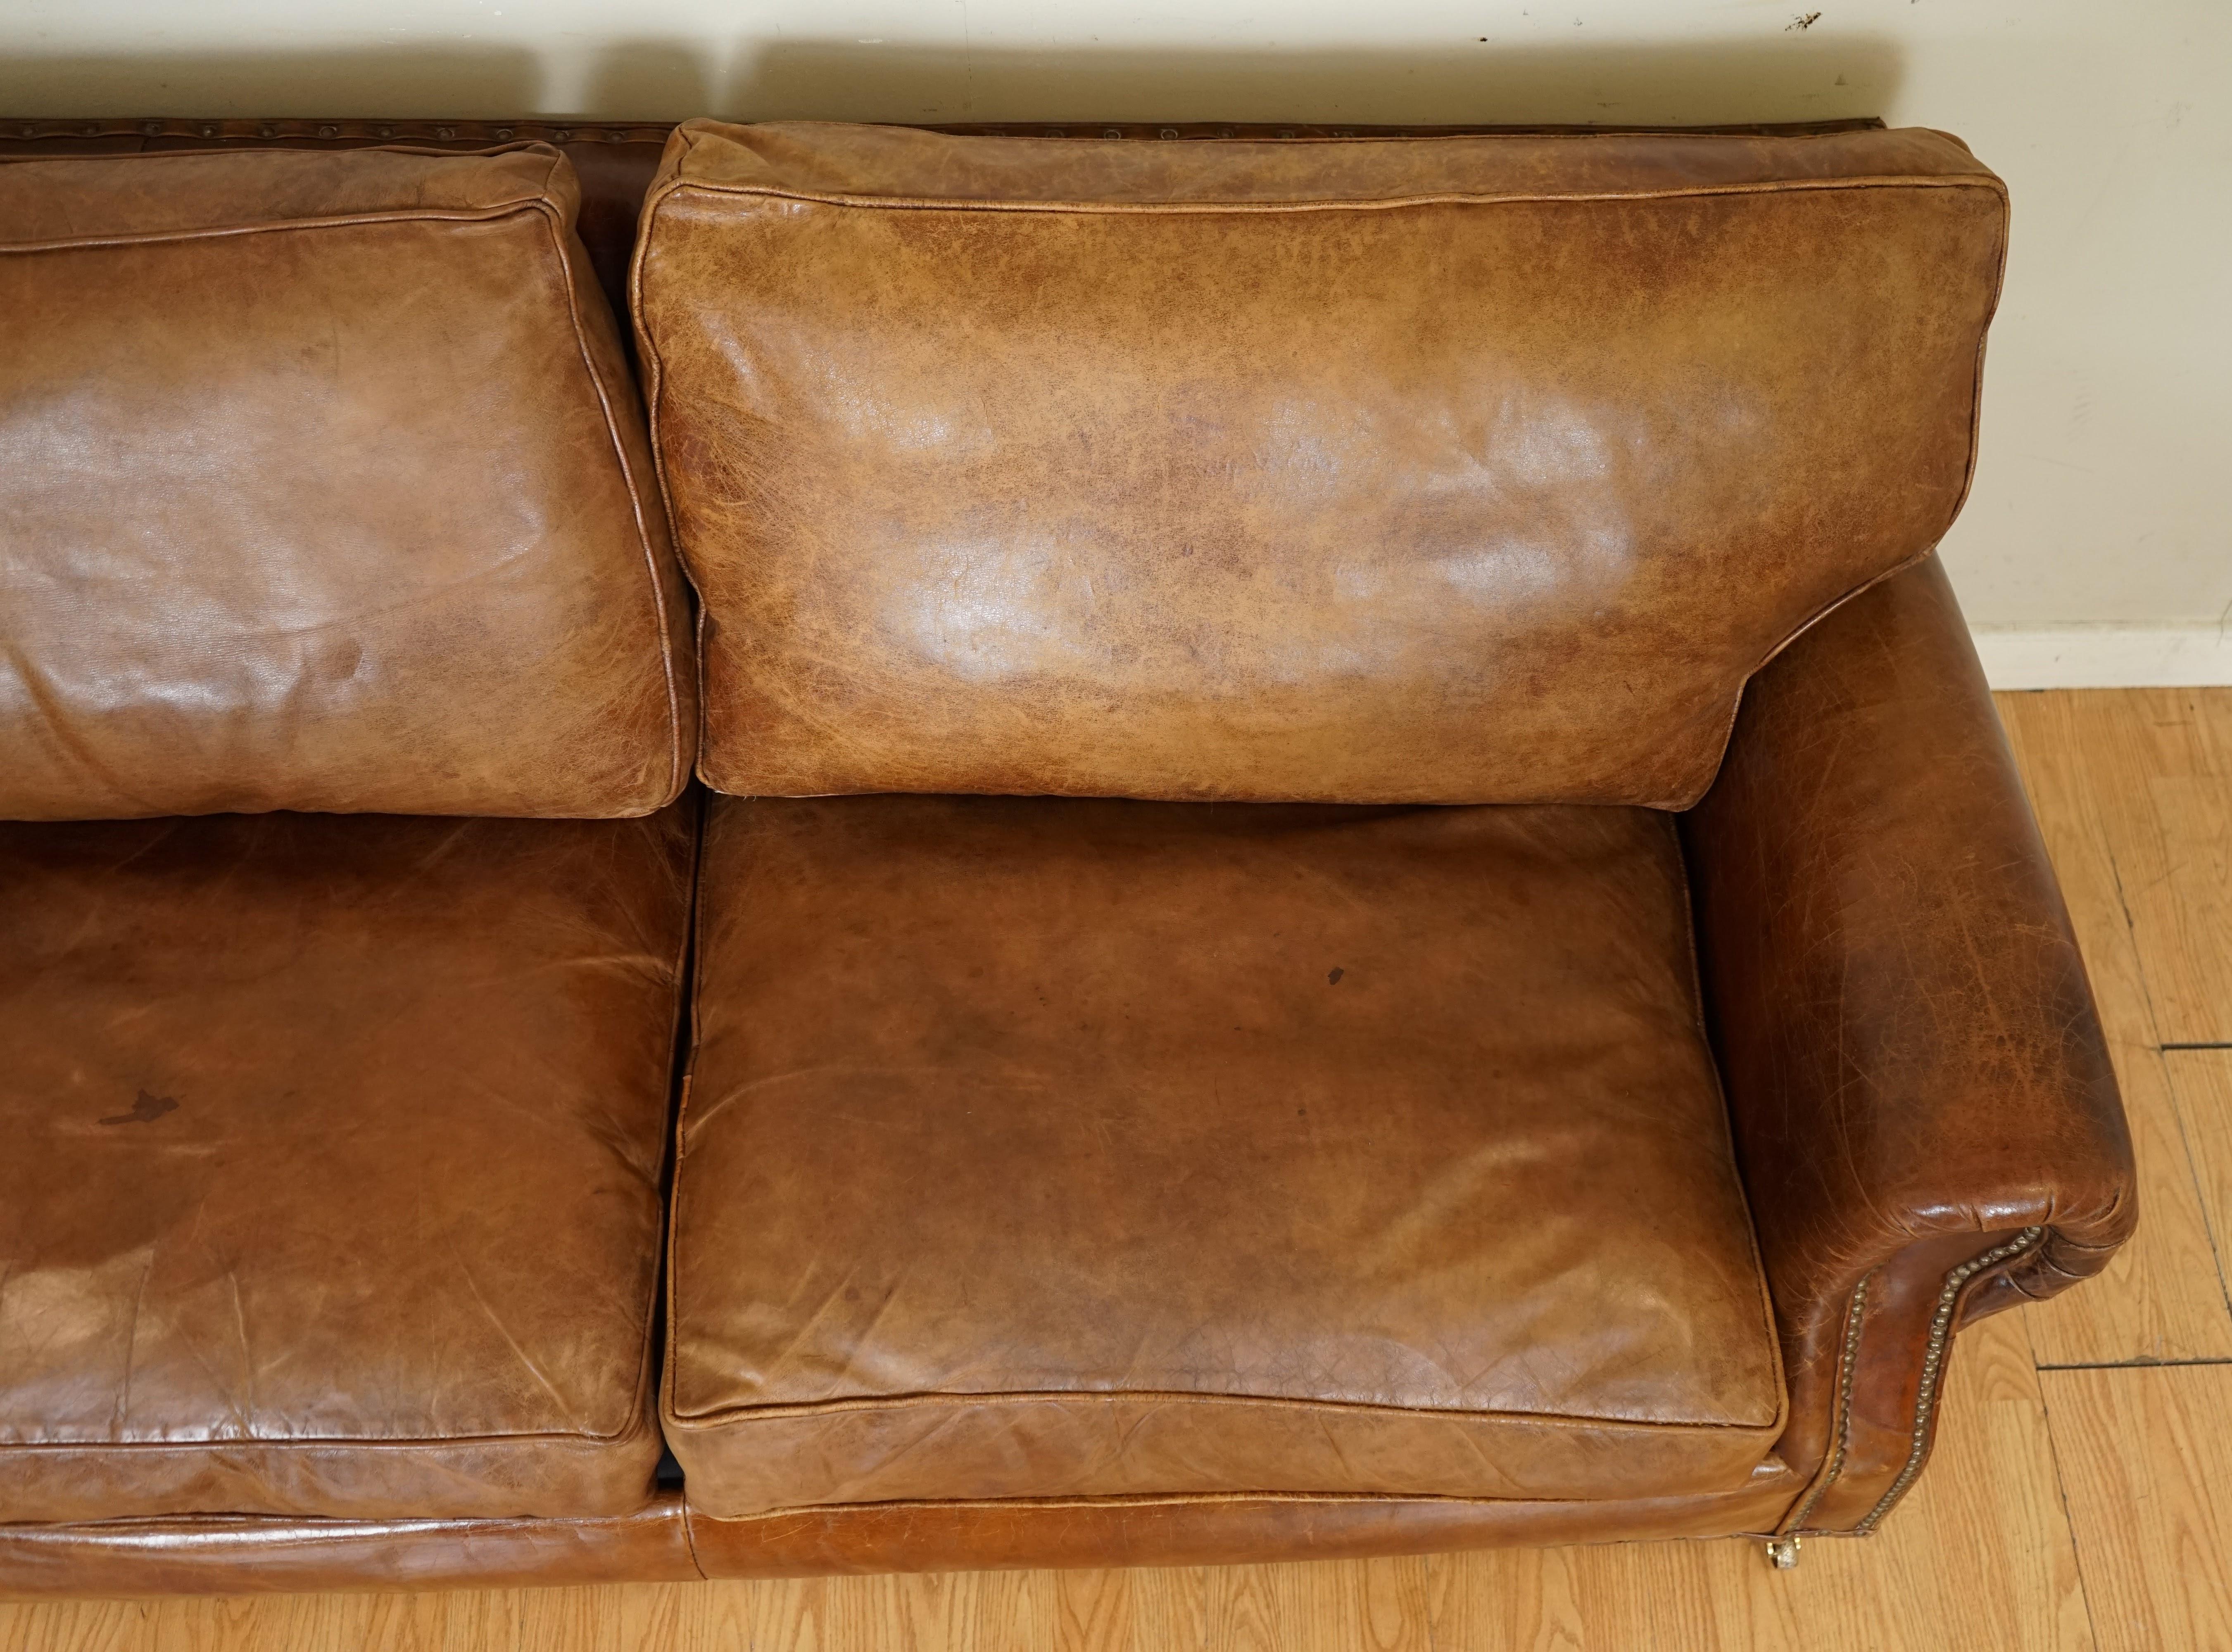 Feather Filled Halo Timothy Oulton Balmoral 3 Seater Heritage Brown Leather Sofa 1